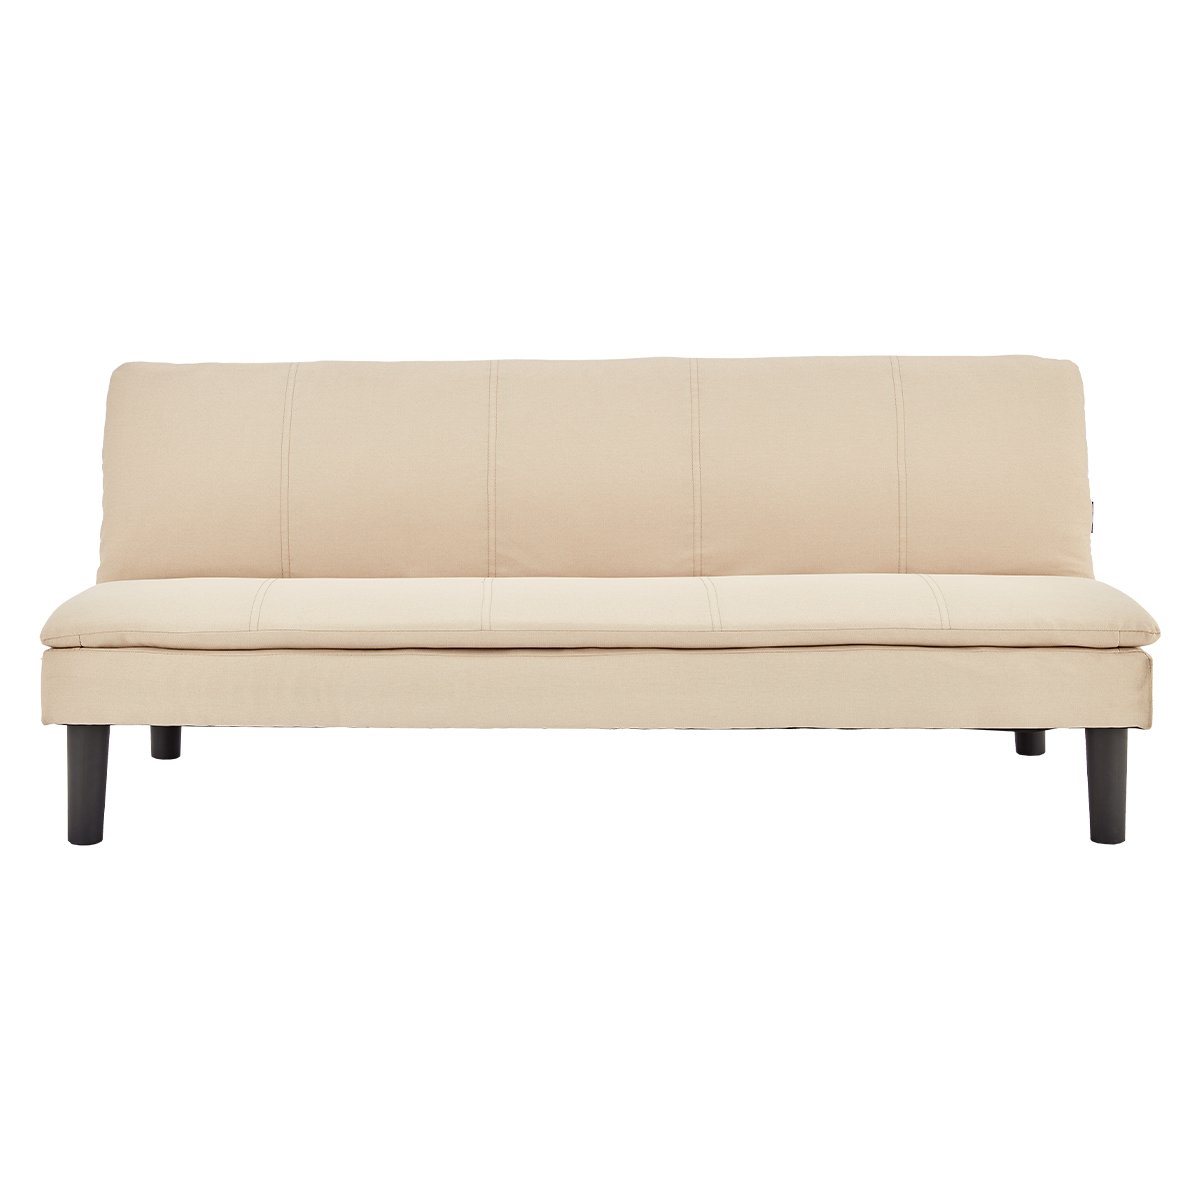 Beige 3 Seater Modular Faux Linen Fabric Sofa Bed Couch by Sarantino